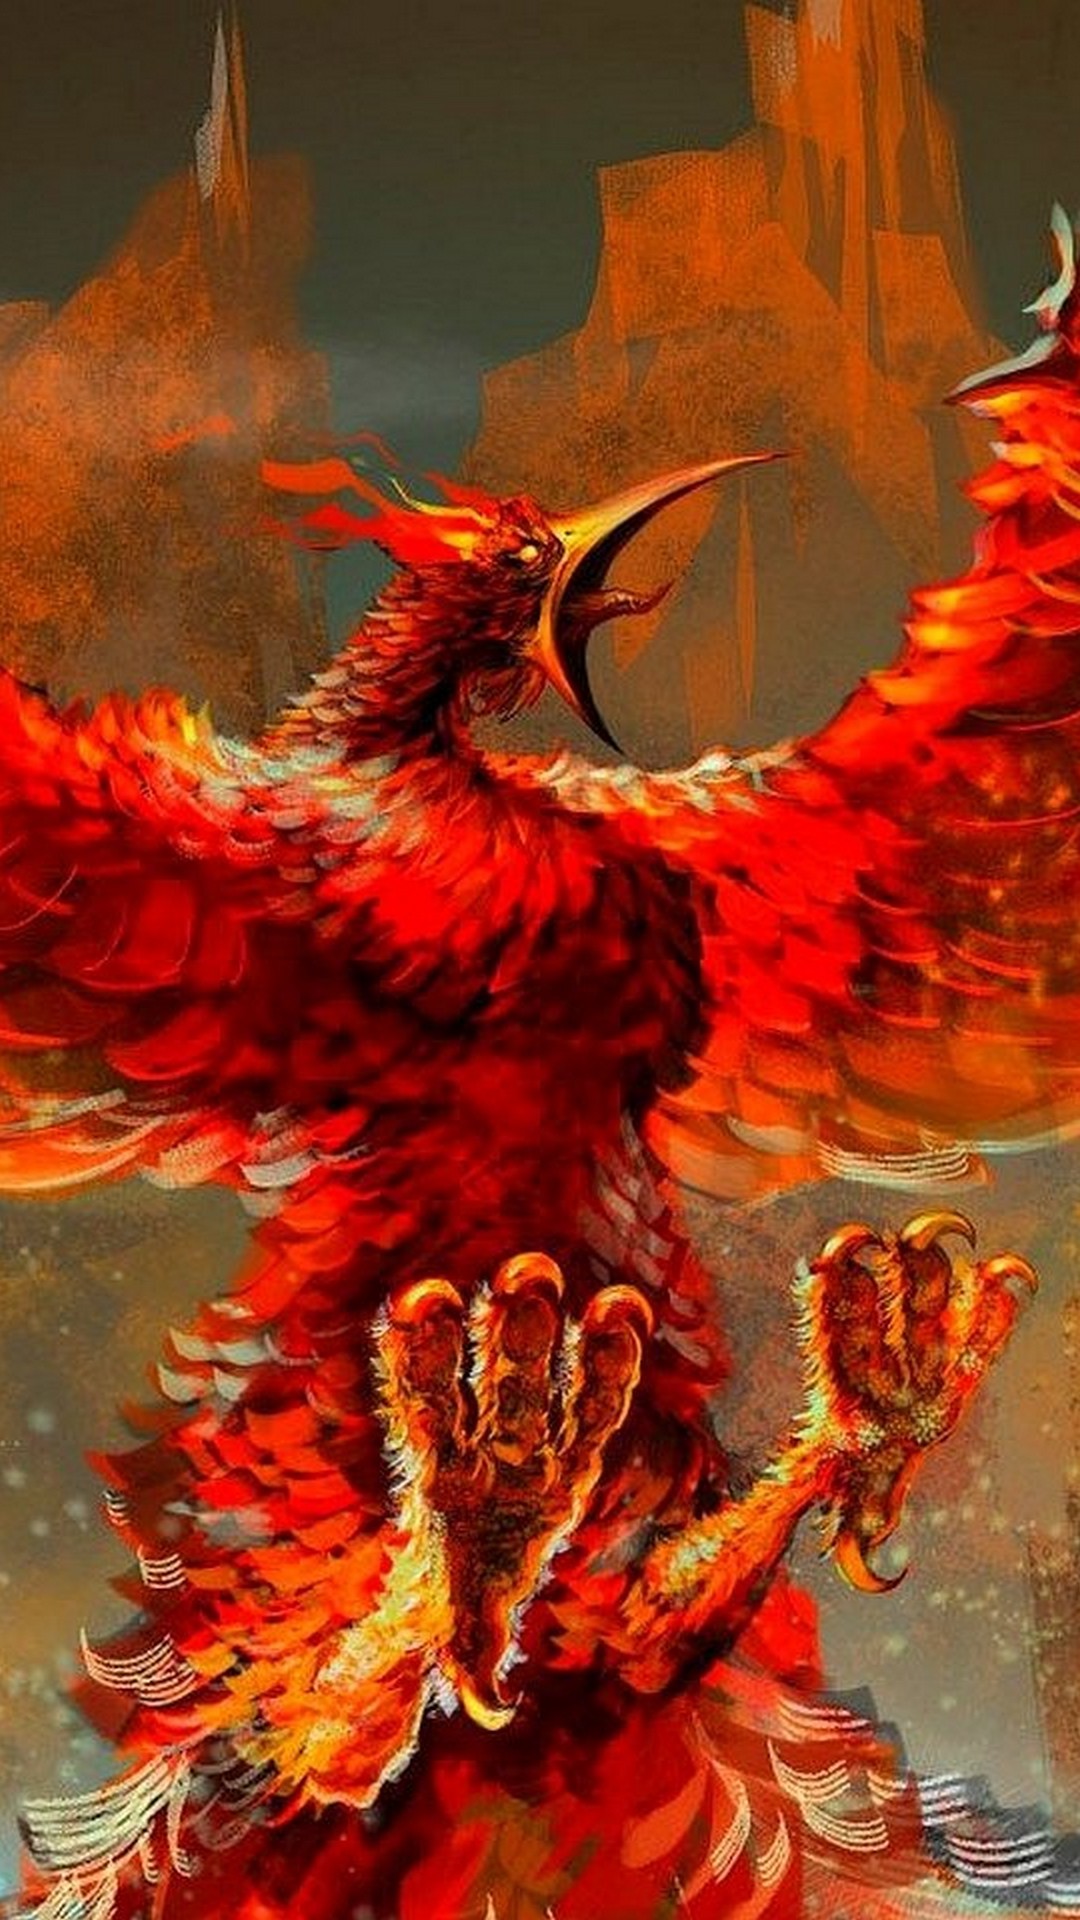 Phoenix Images Wallpaper Android with image resolution 1080x1920 pixel. You can make this wallpaper for your Android backgrounds, Tablet, Smartphones Screensavers and Mobile Phone Lock Screen